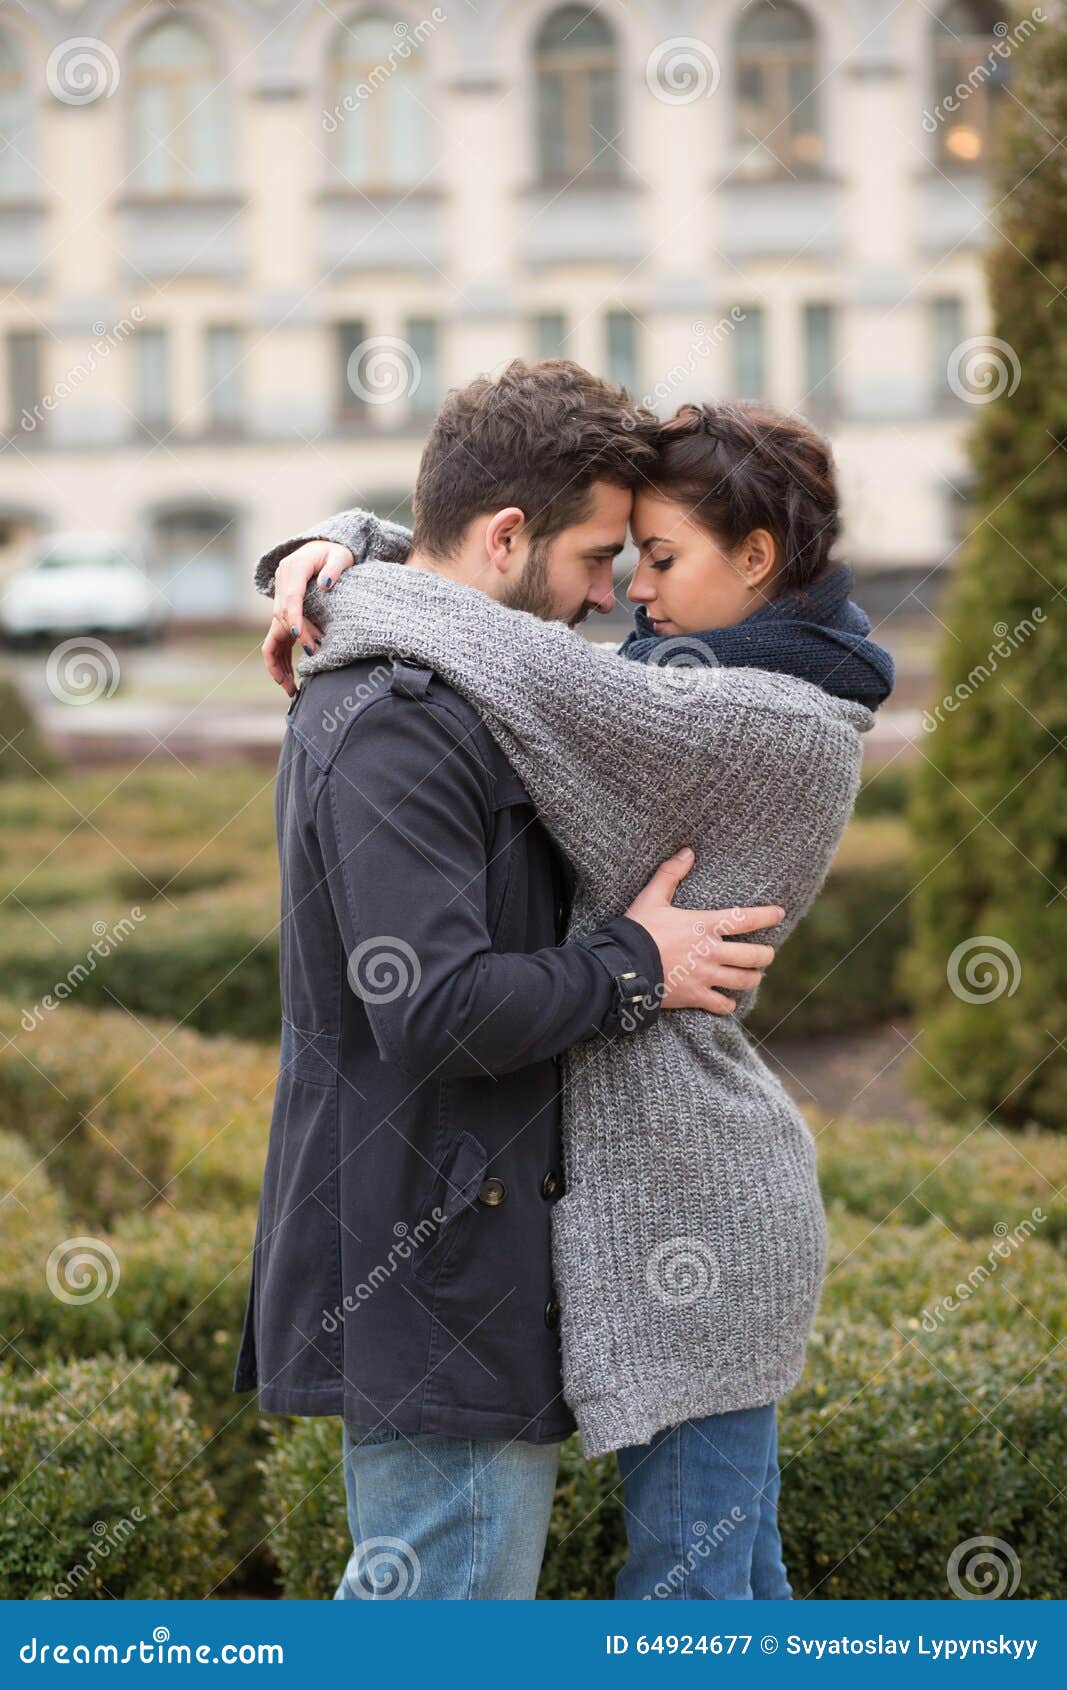 https://thumbs.dreamstime.com/z/happy-couple-hugging-autumn-park-portrait-standing-face-to-face-beautiful-people-love-64924677.jpg